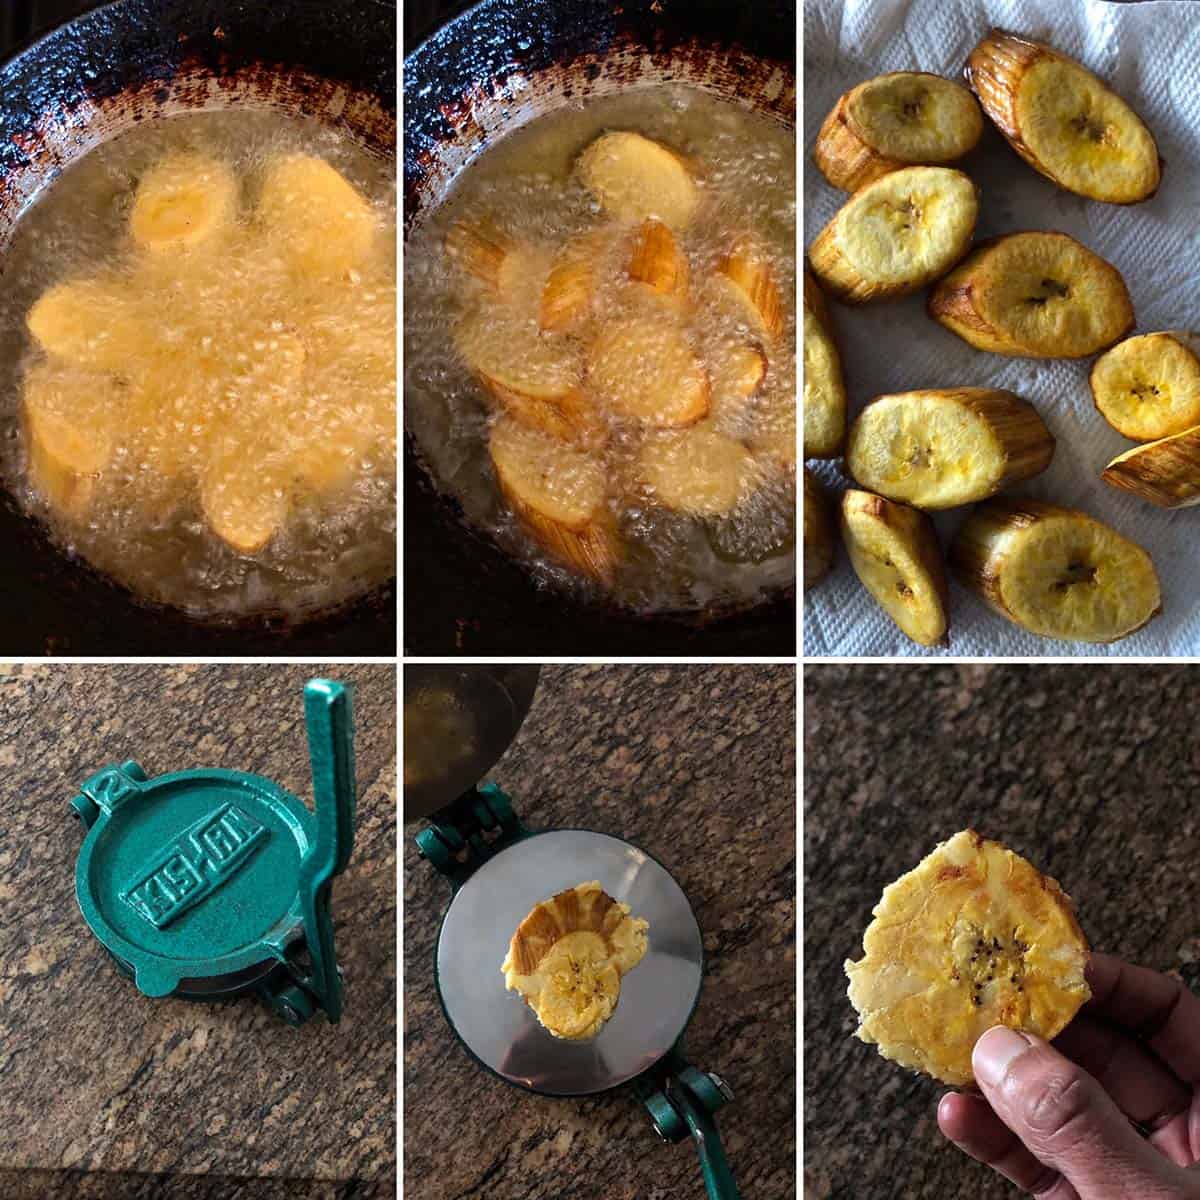 6 panel photo showing the deep frying of plantain.